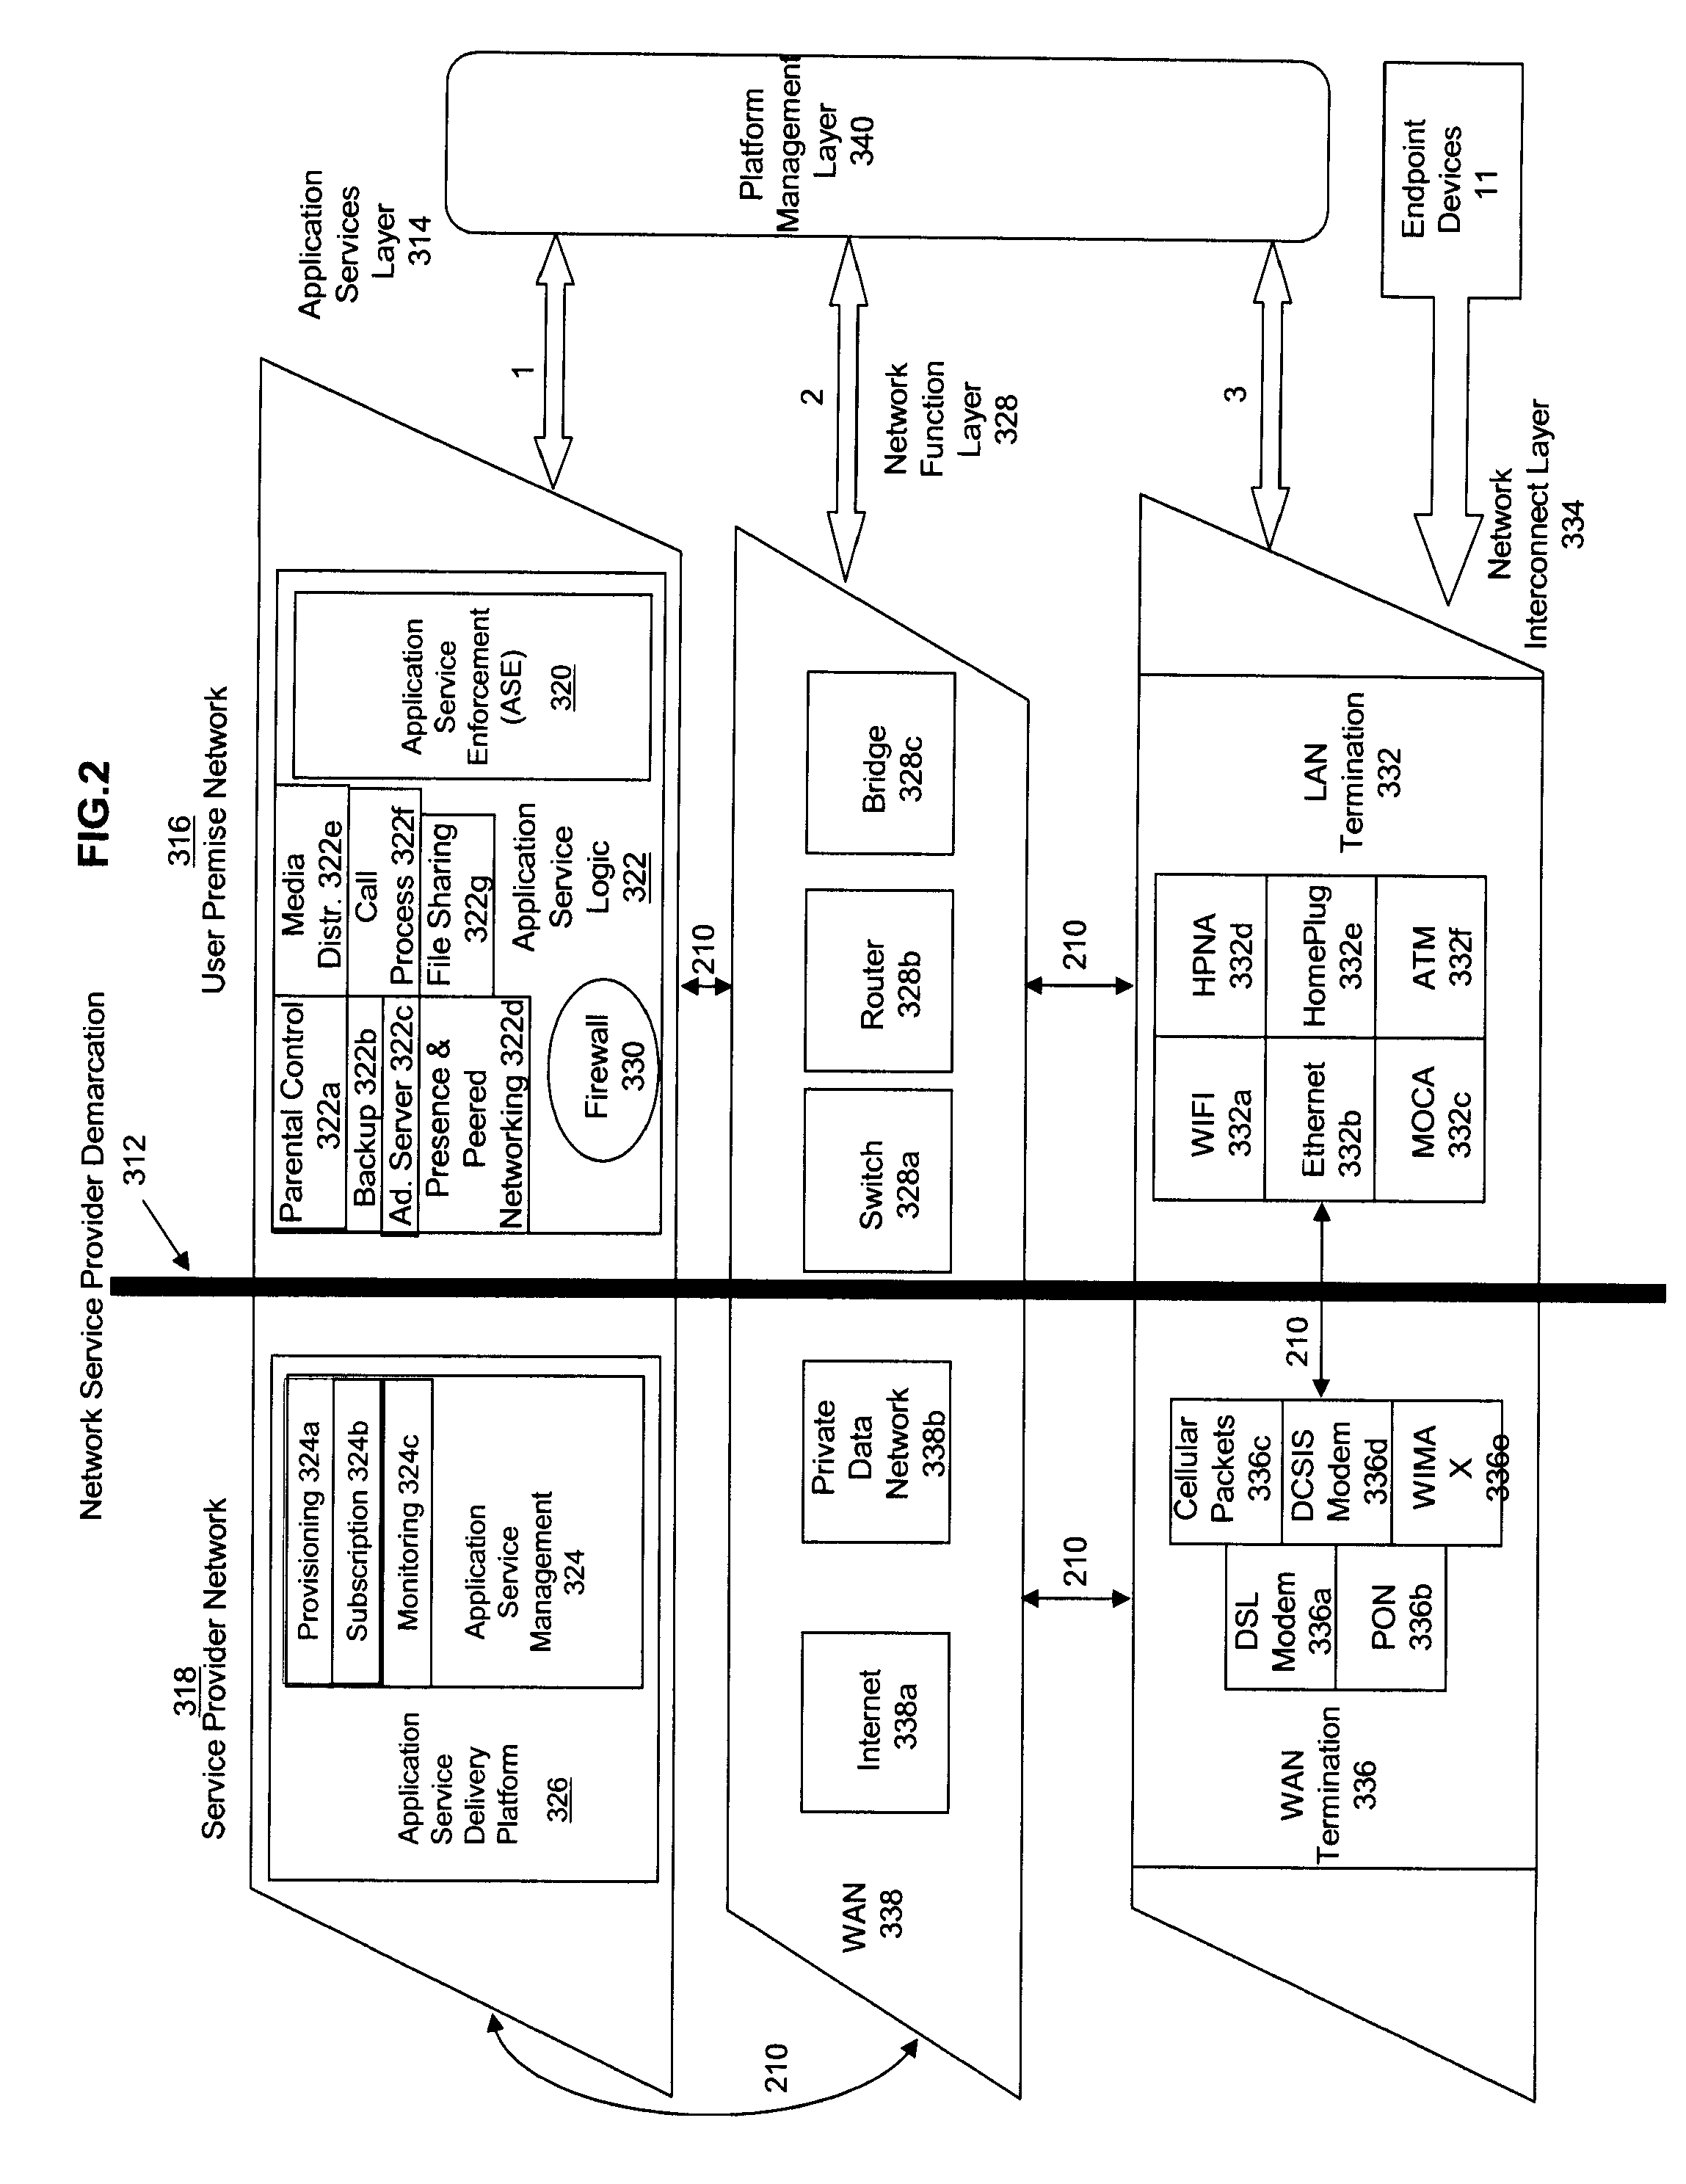 System and Method to Manage and Distribute Media Using a Predictive Media Cache